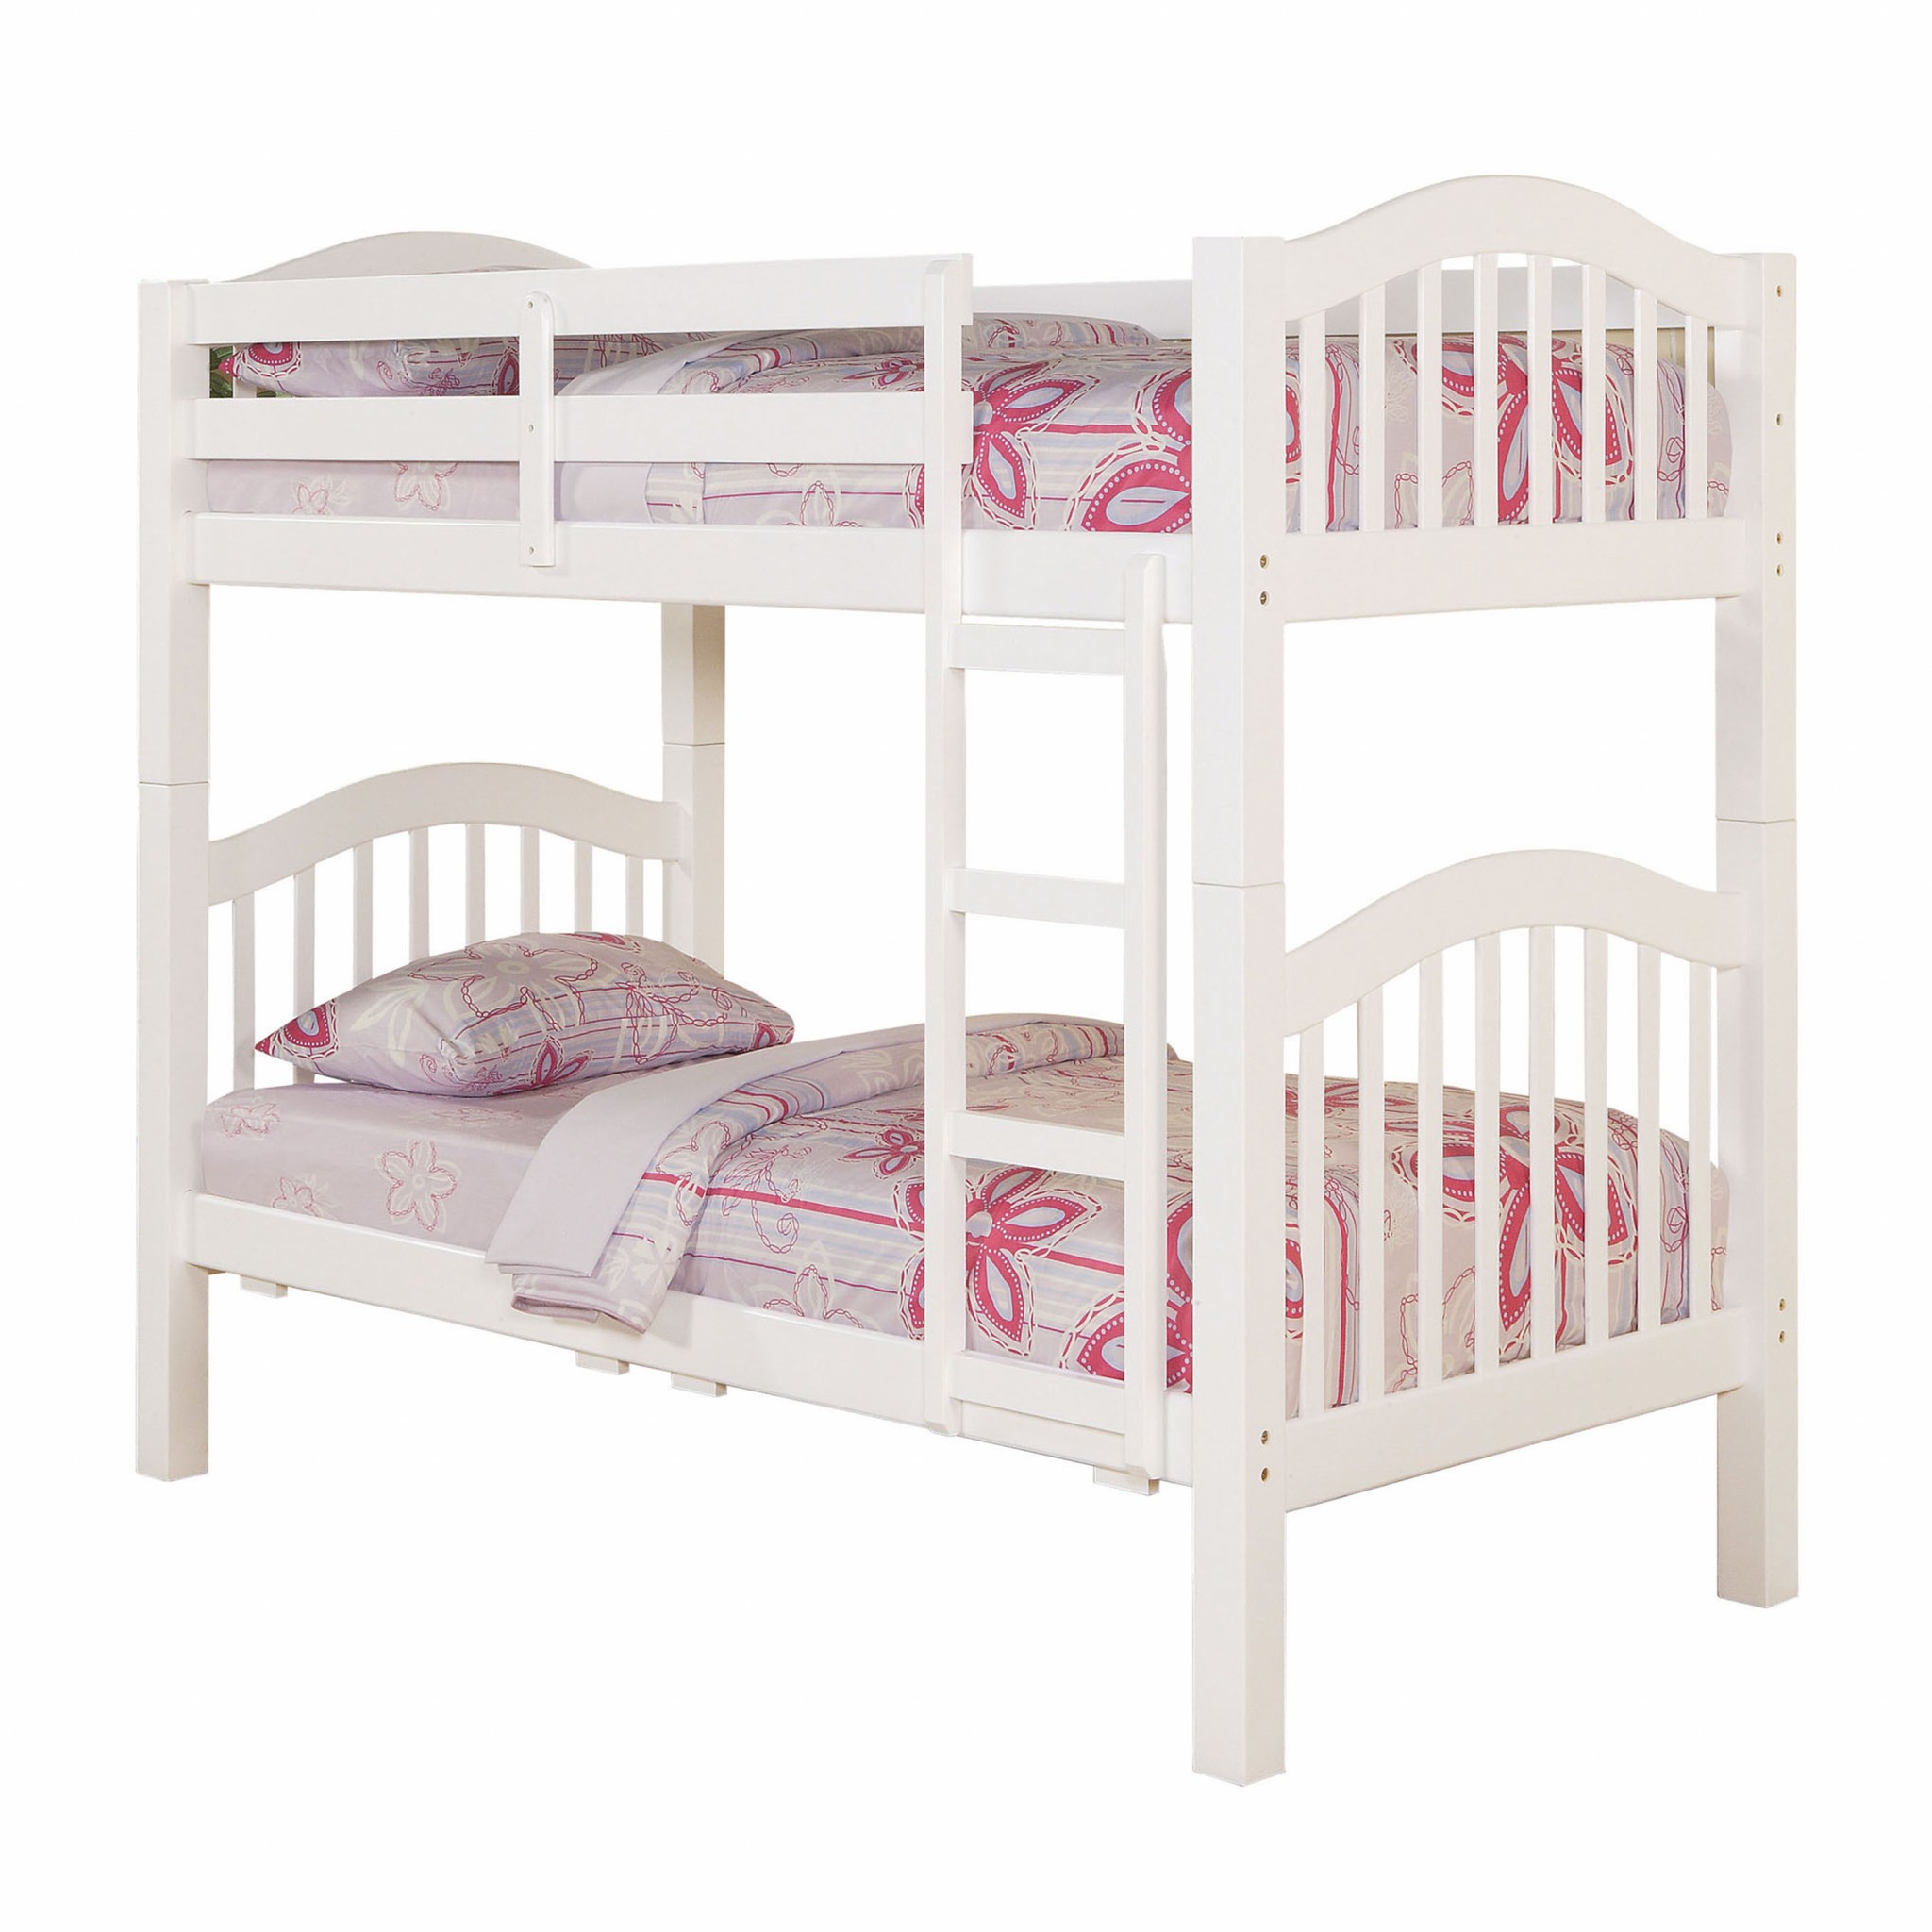 80" X 43" X 69" White Pine Wood Twin Over Twin Bunk Bed